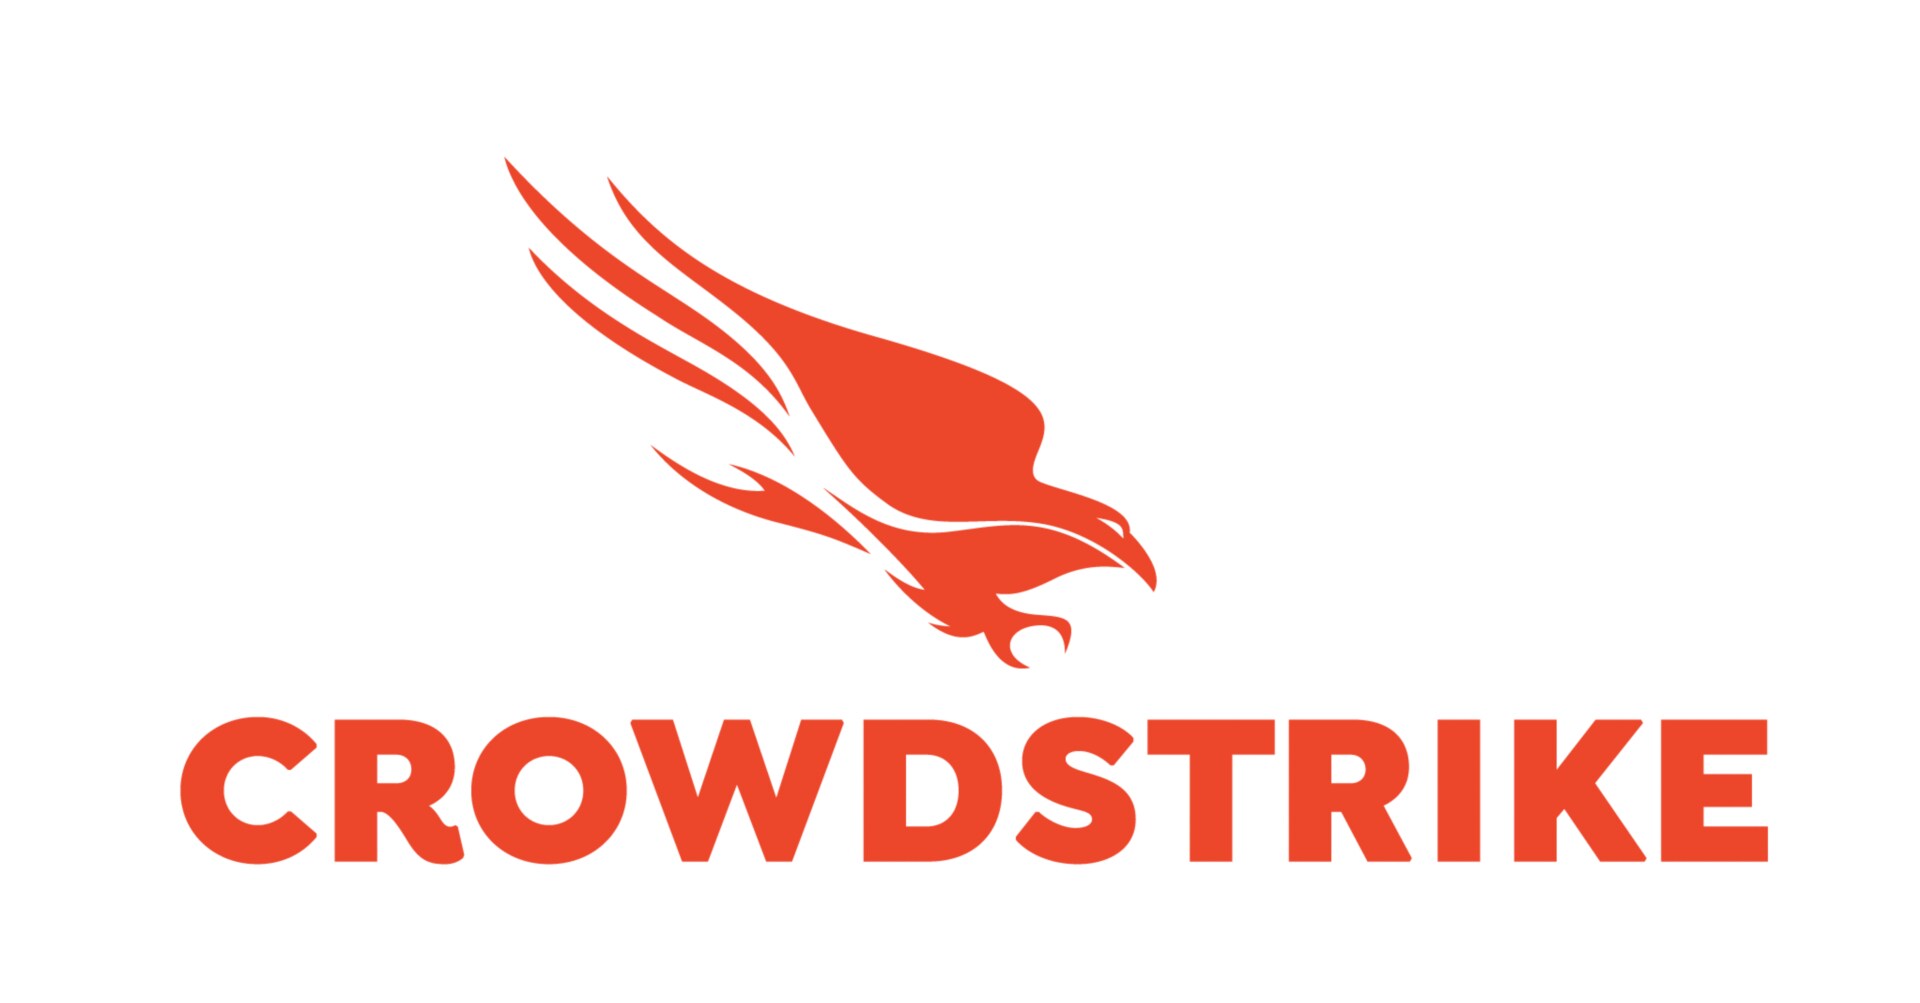 CrowdStrike 36-Month Falcon Complete: CID Management (Complimentary) Software Subscription